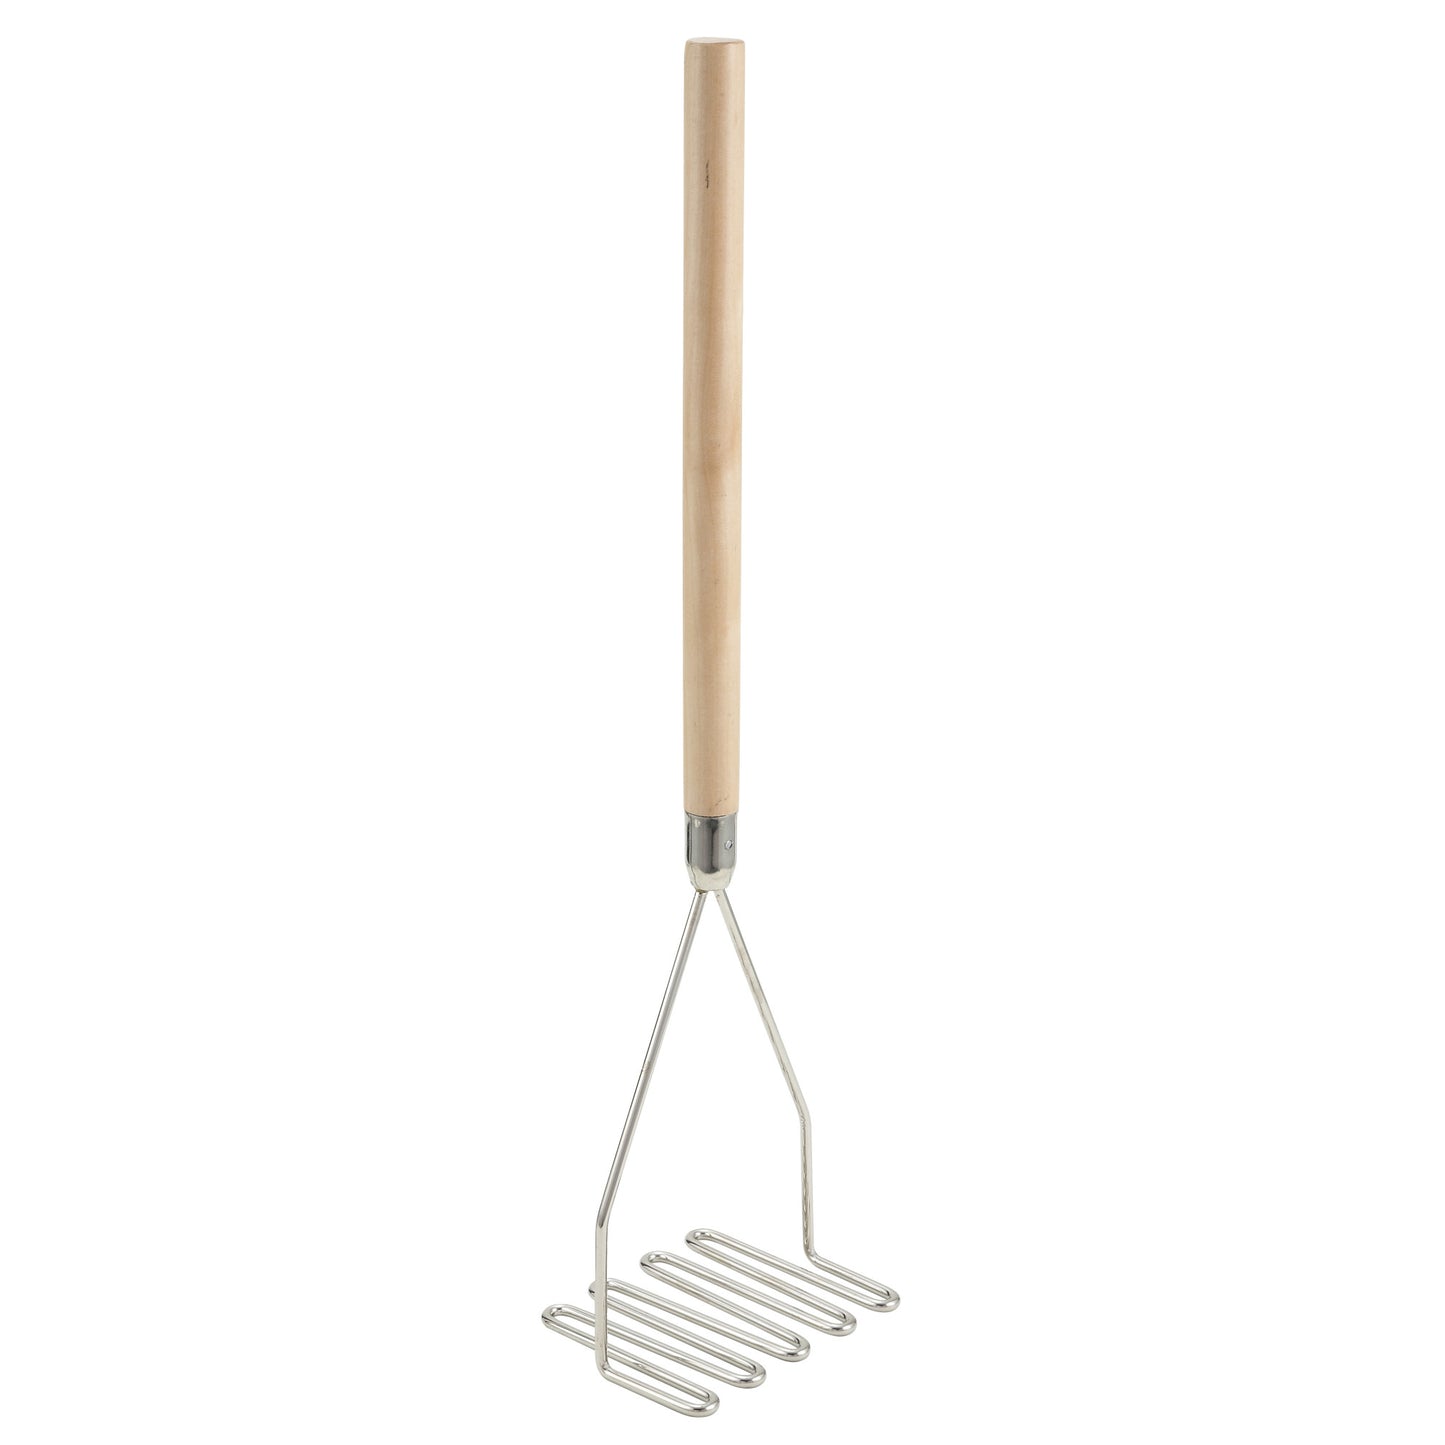 Potato Masher with Wooden Handle - 5-1/4" Square